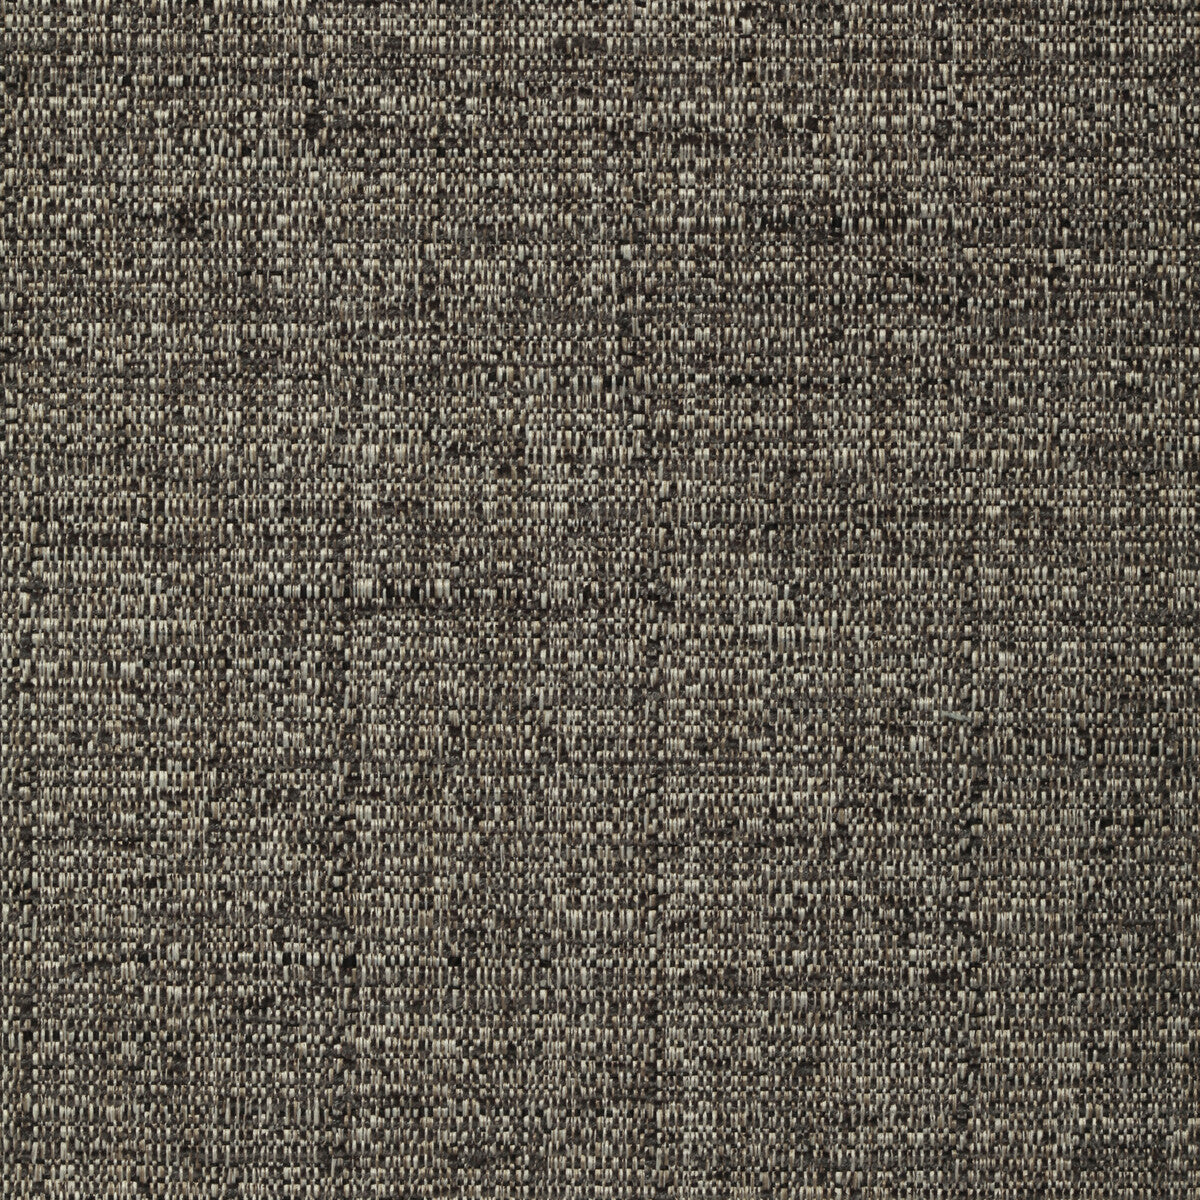 Kravet Smart fabric in 35127-21 color - pattern 35127.21.0 - by Kravet Smart in the Performance Crypton Home collection